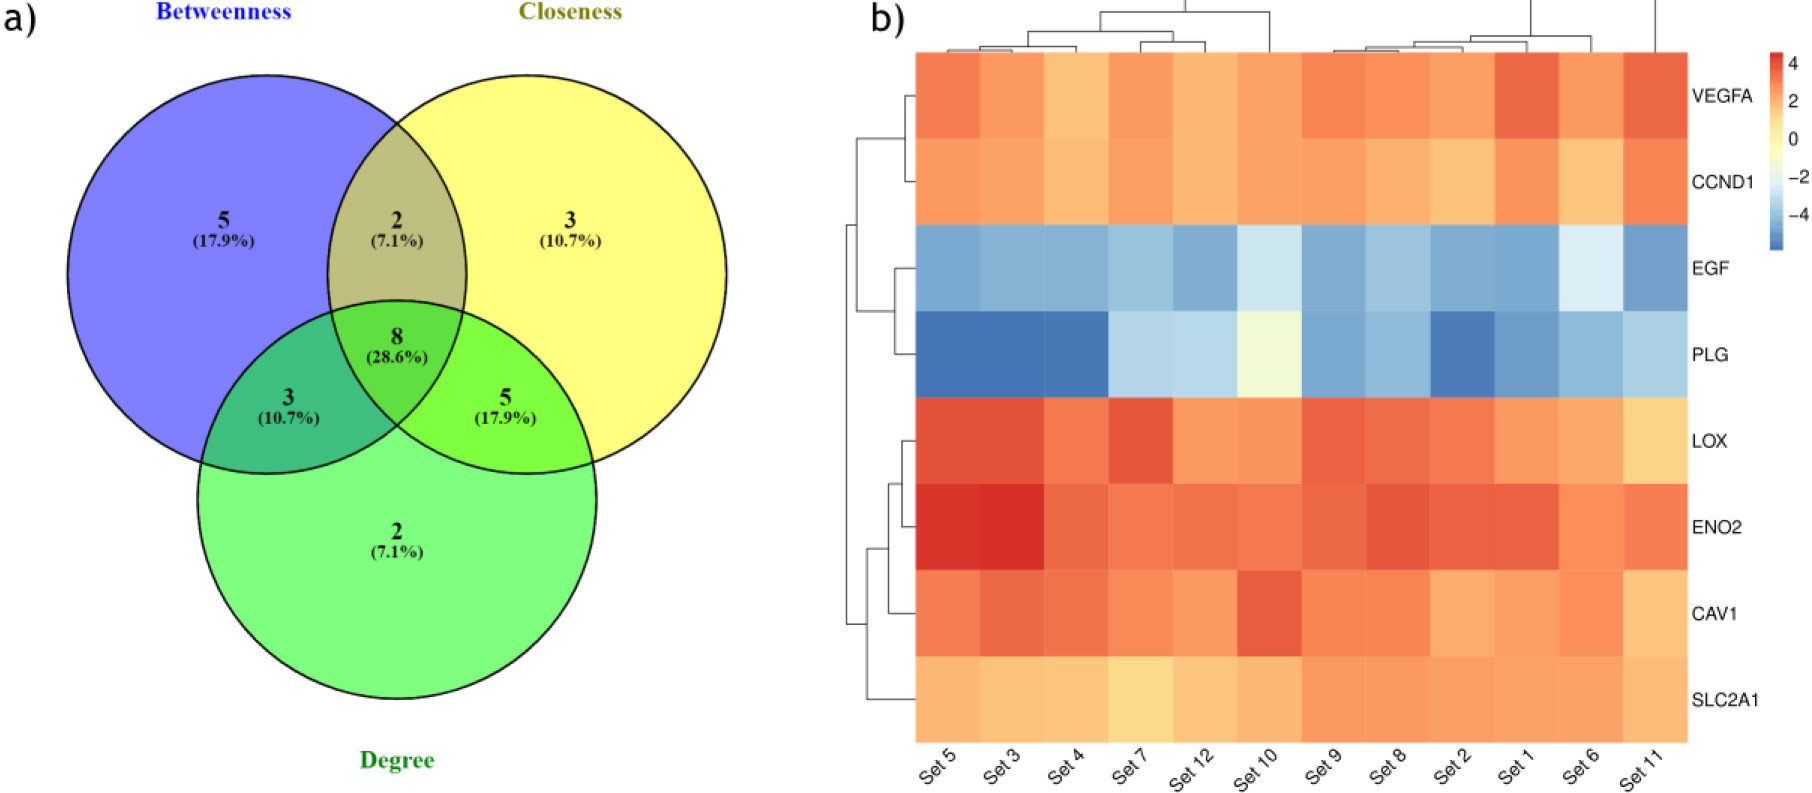 (a) Identification of hub genes with top centrality scores (Degree, betweenness, closeness). (b) Heatmap showing expression pattern of eight hub genes in all the 12 ccRCC datasets.